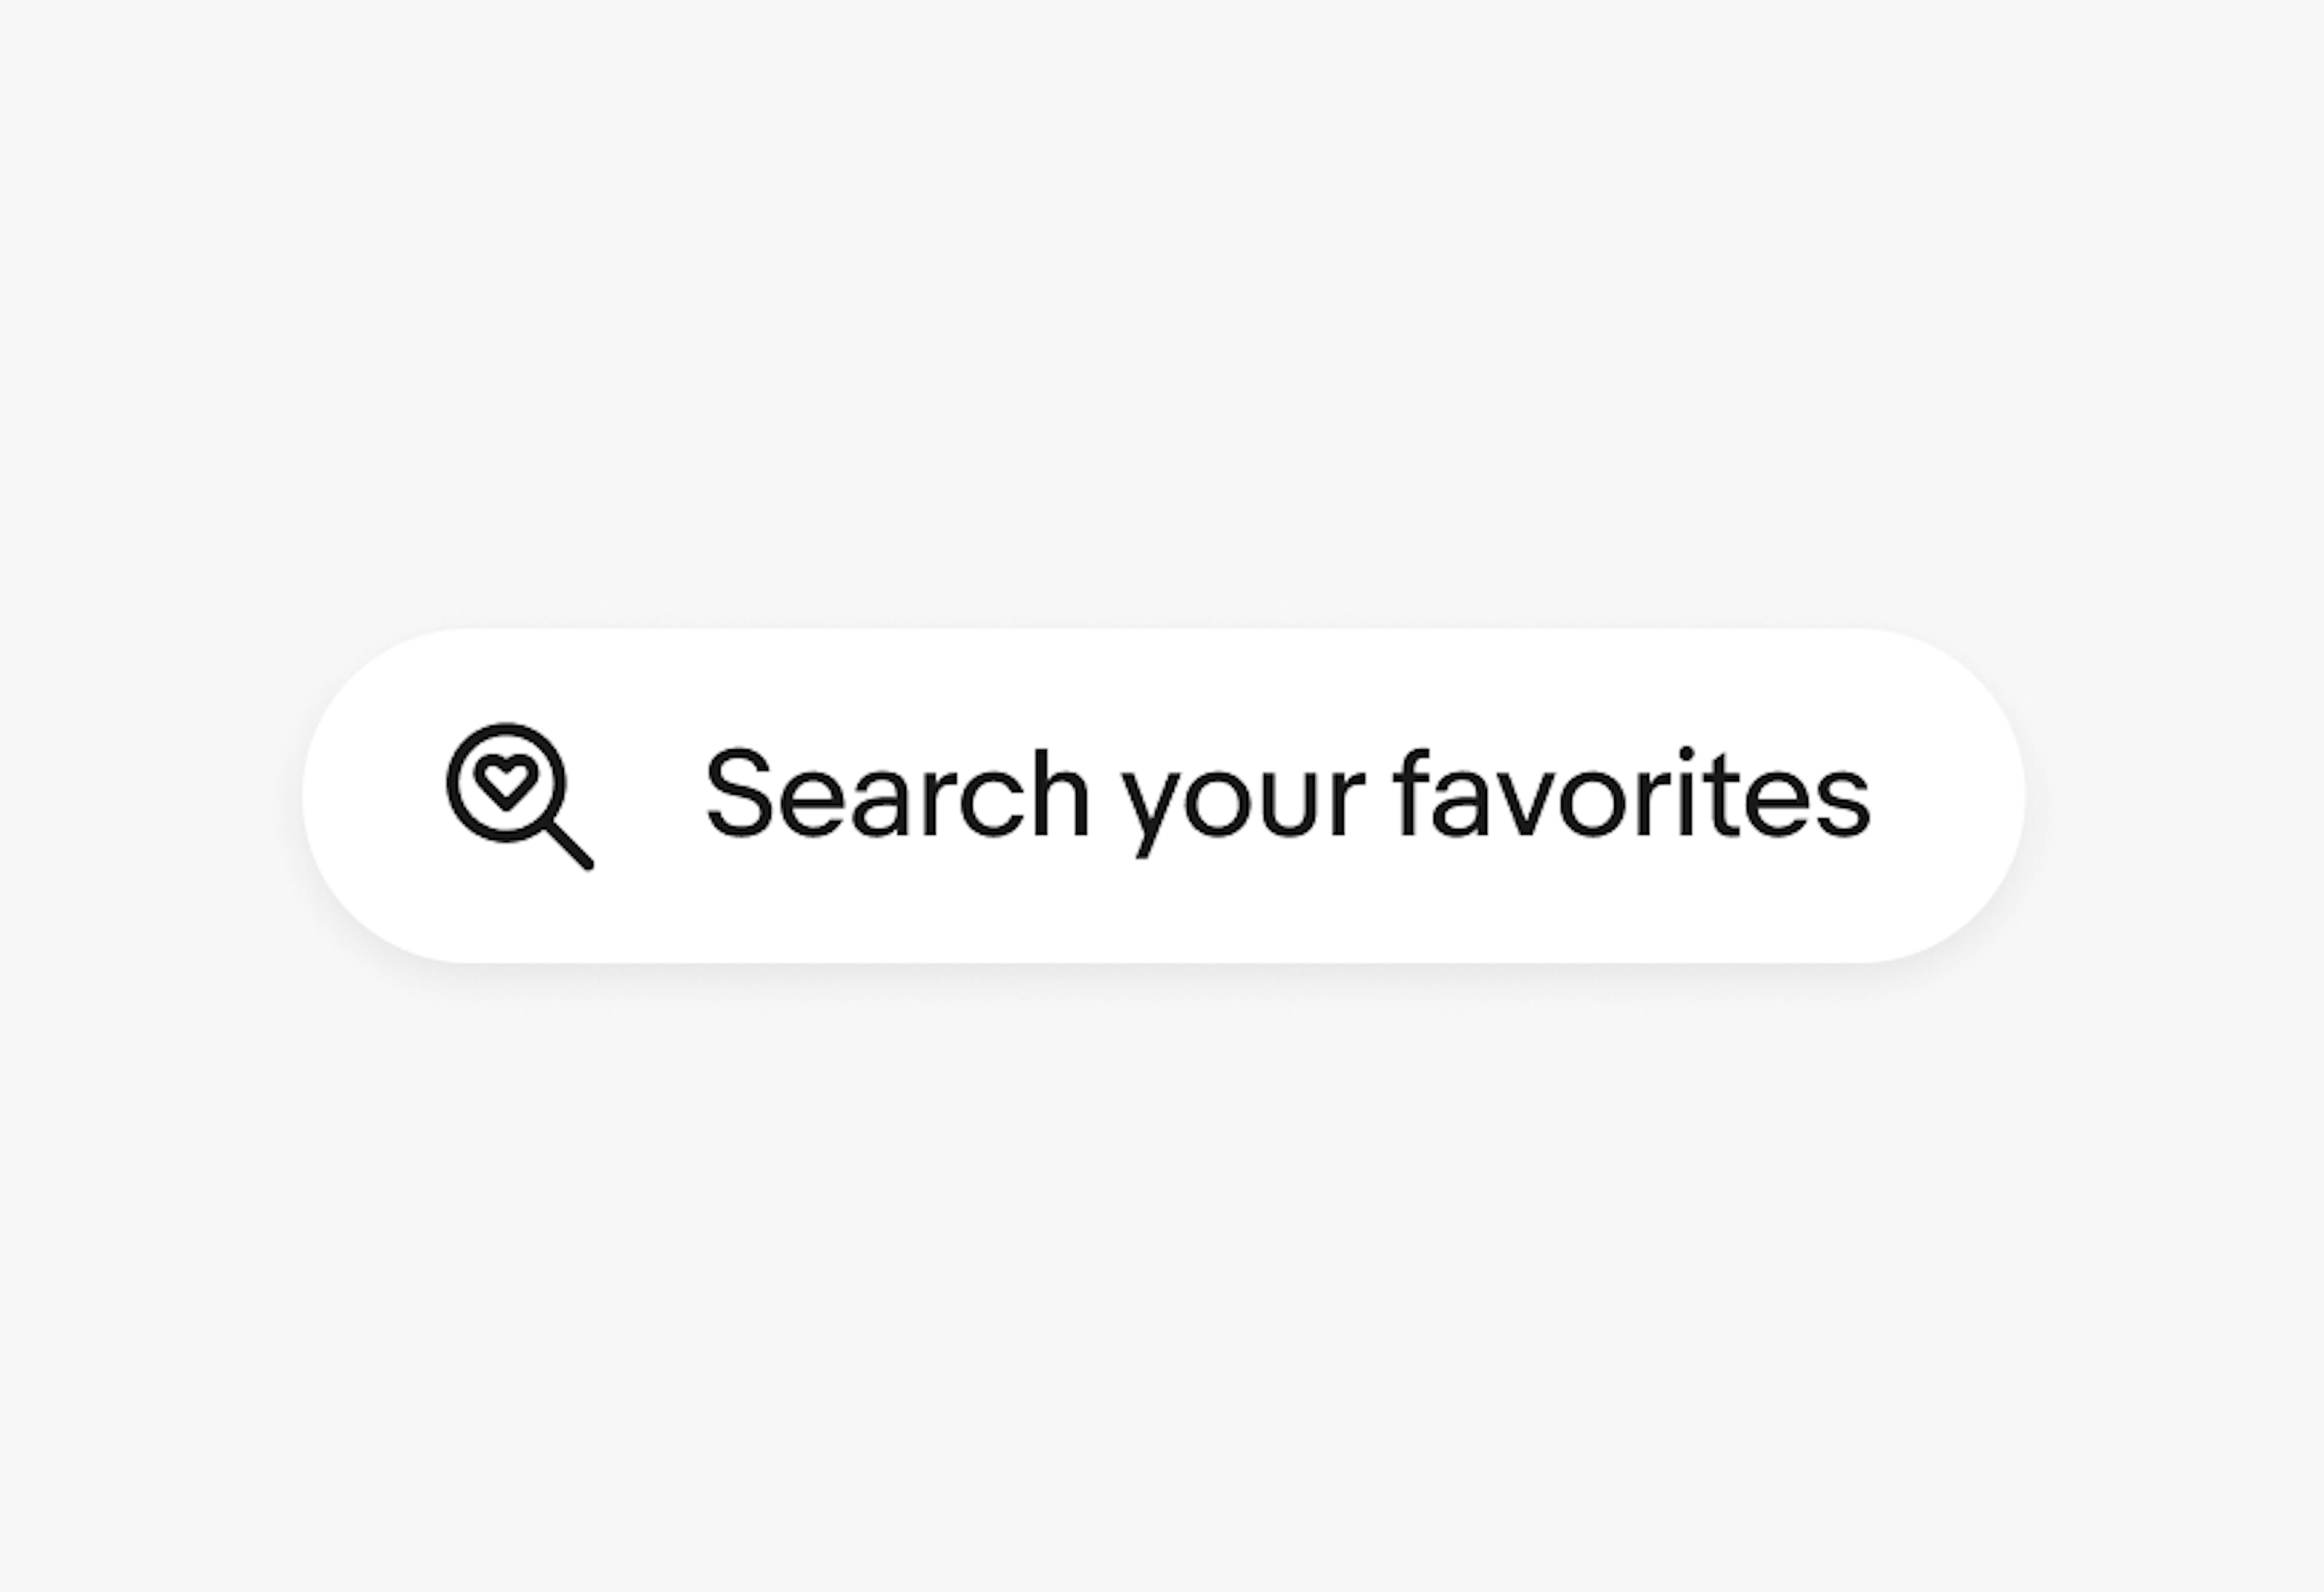 A search input with a search icon and placeholder text. This search icon has a heart icon inside of it.